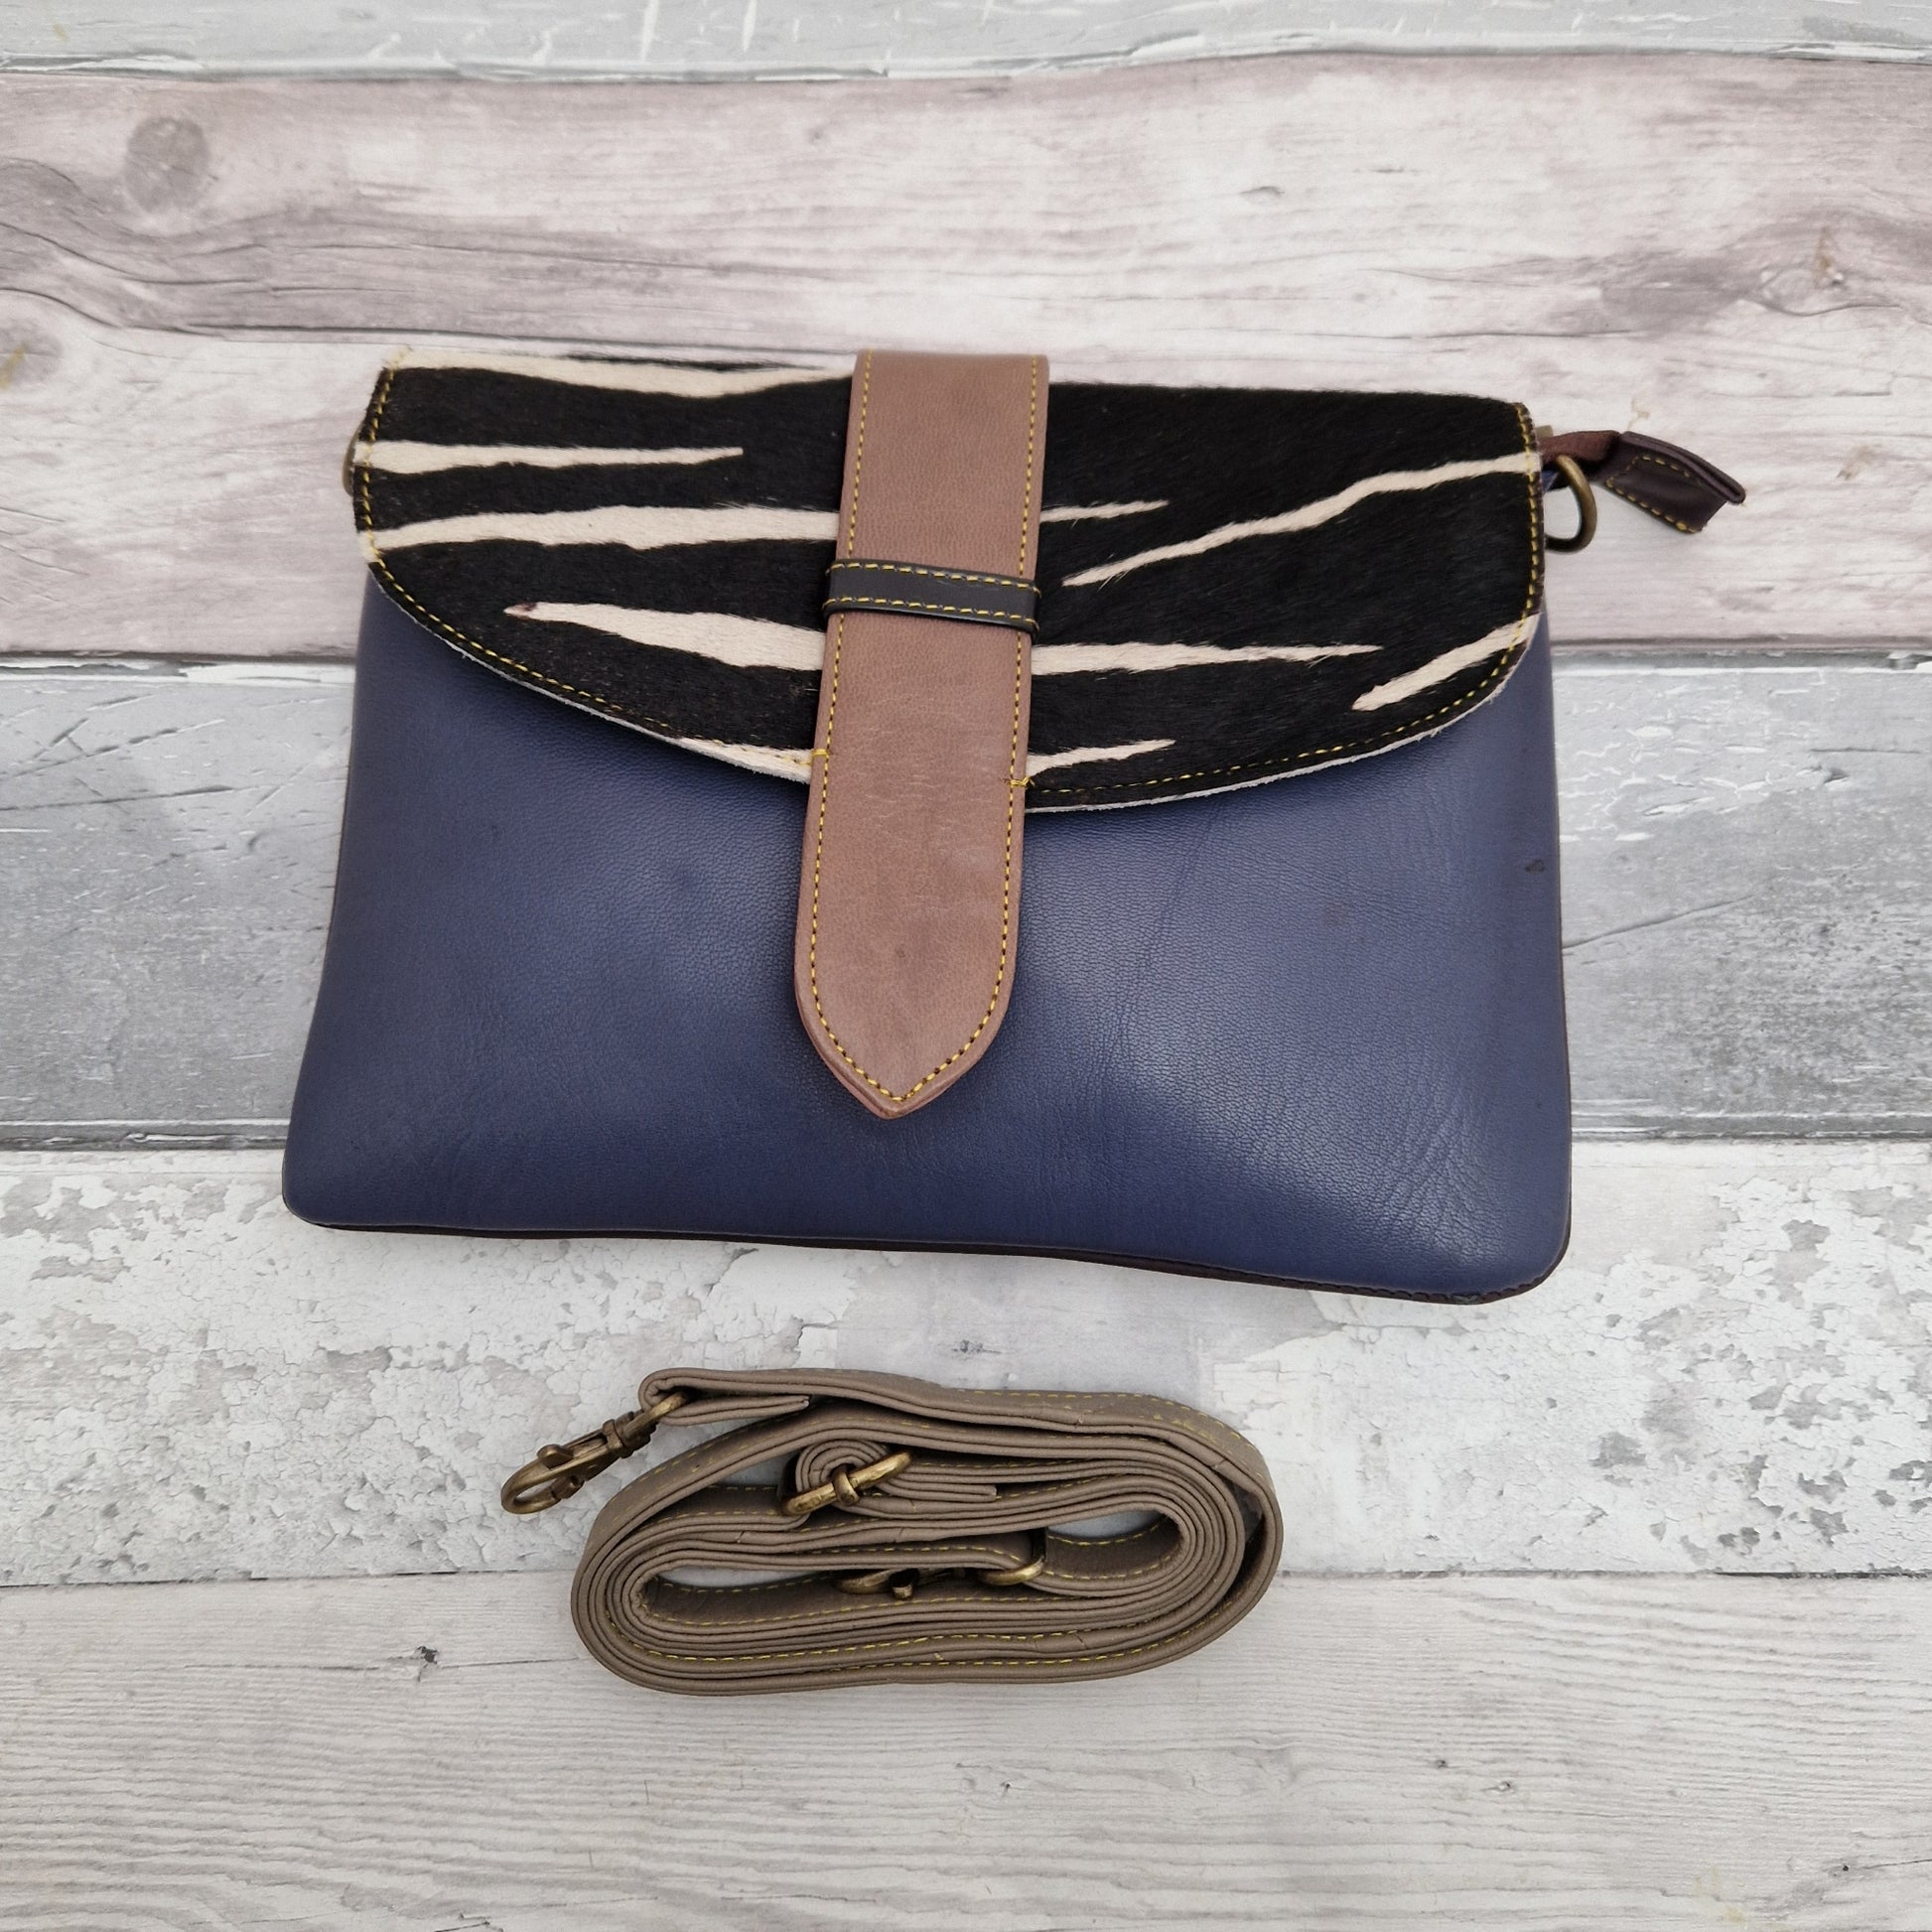 Navy leather bag with a textured panel in Zebra Print.